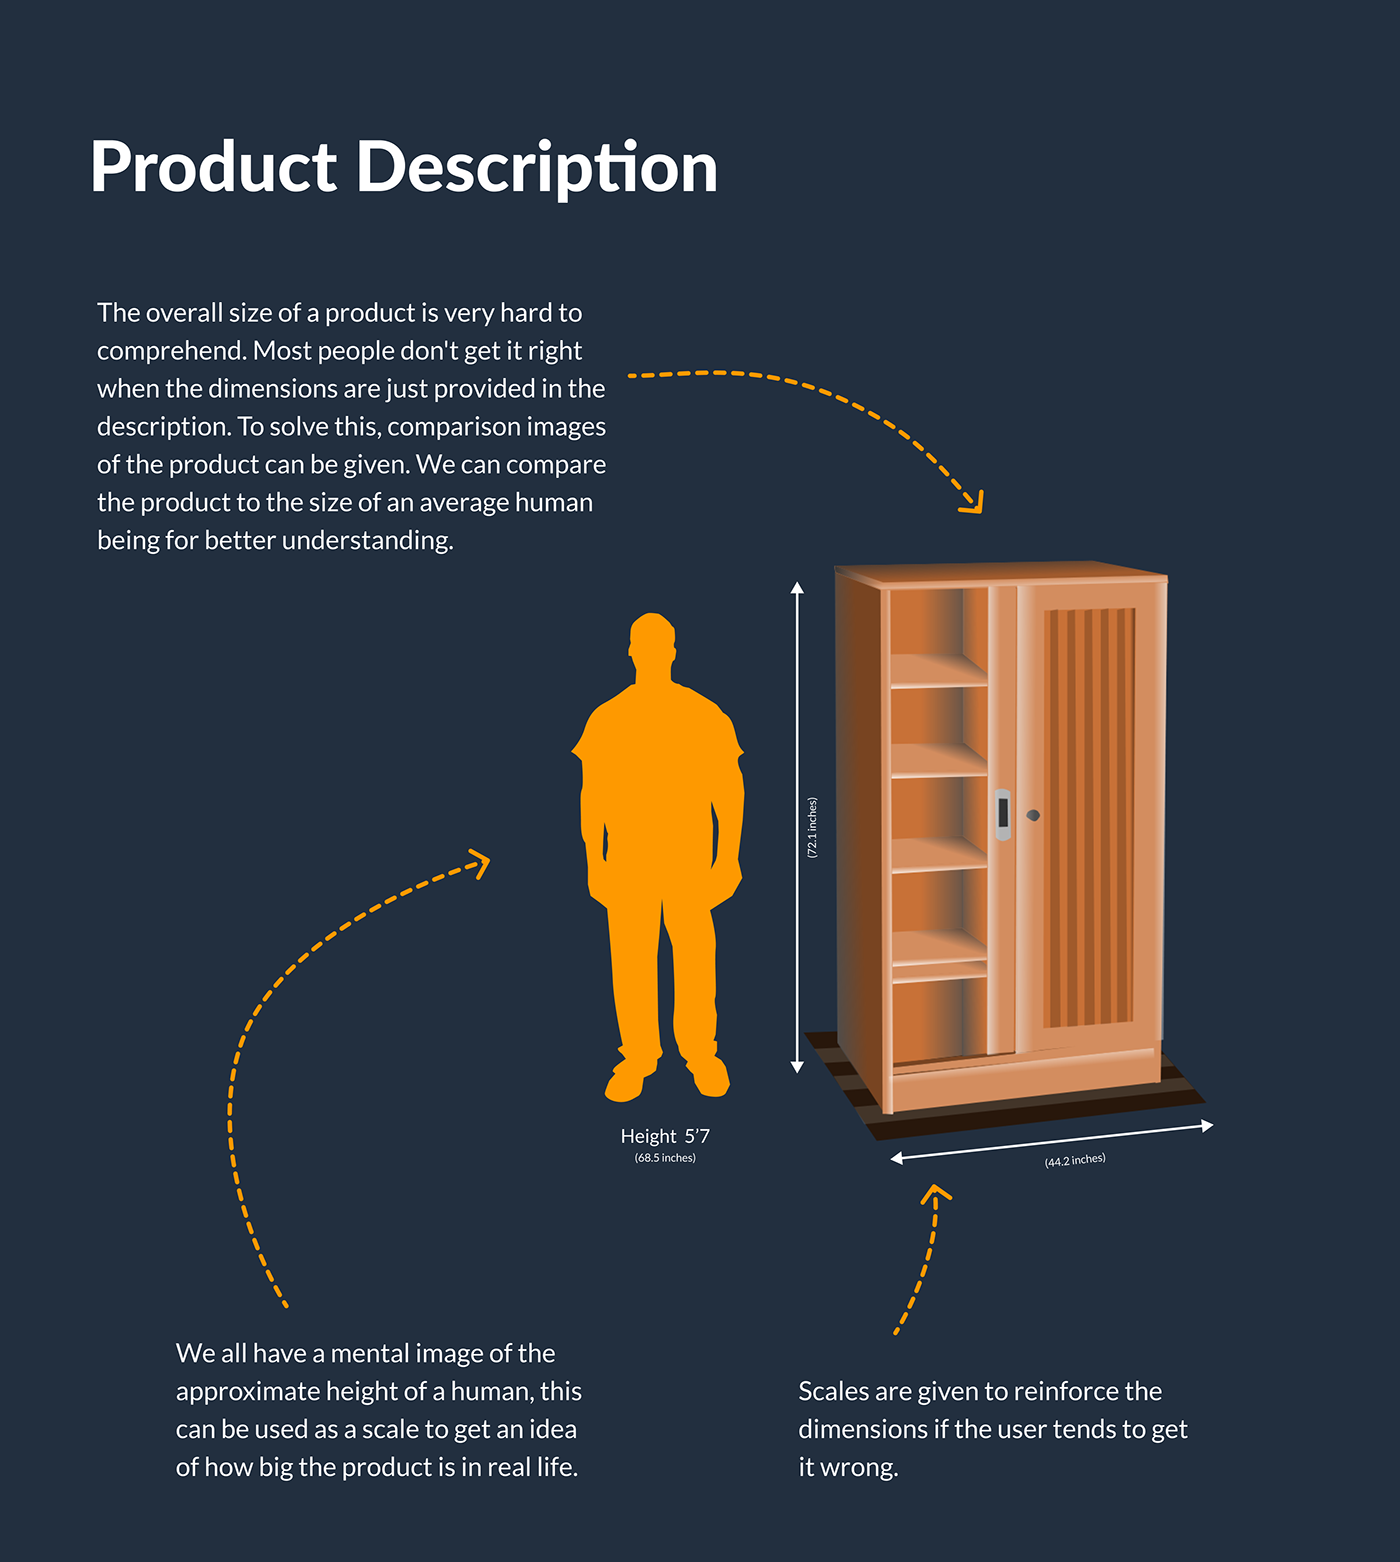 an improved product description so that users get a better understanding of the product